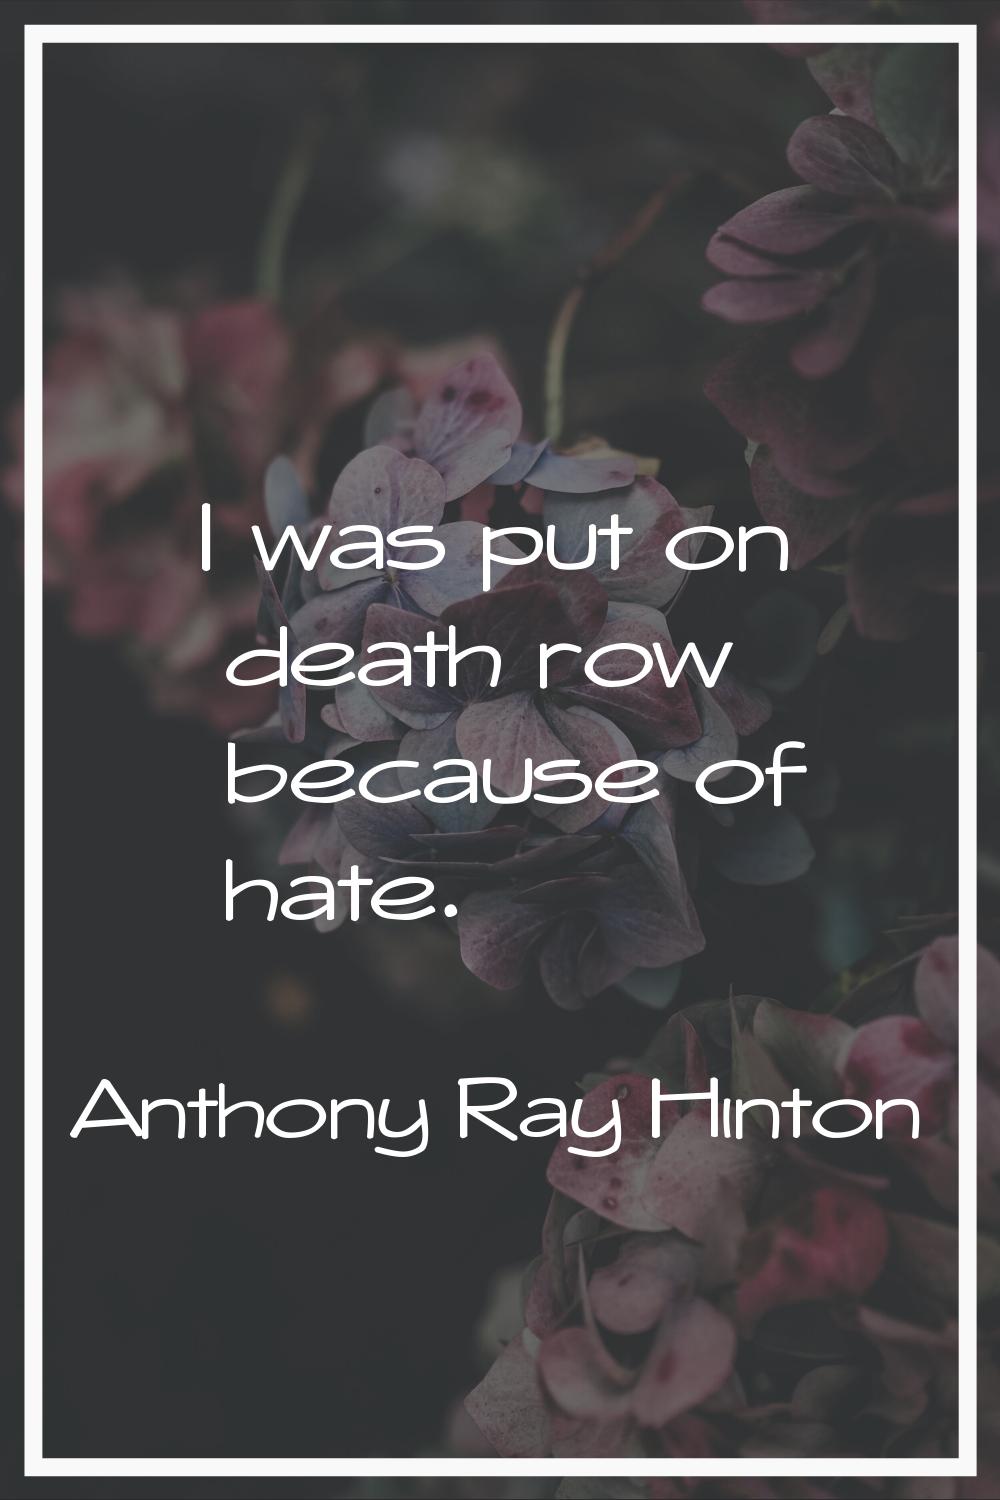 I was put on death row because of hate.